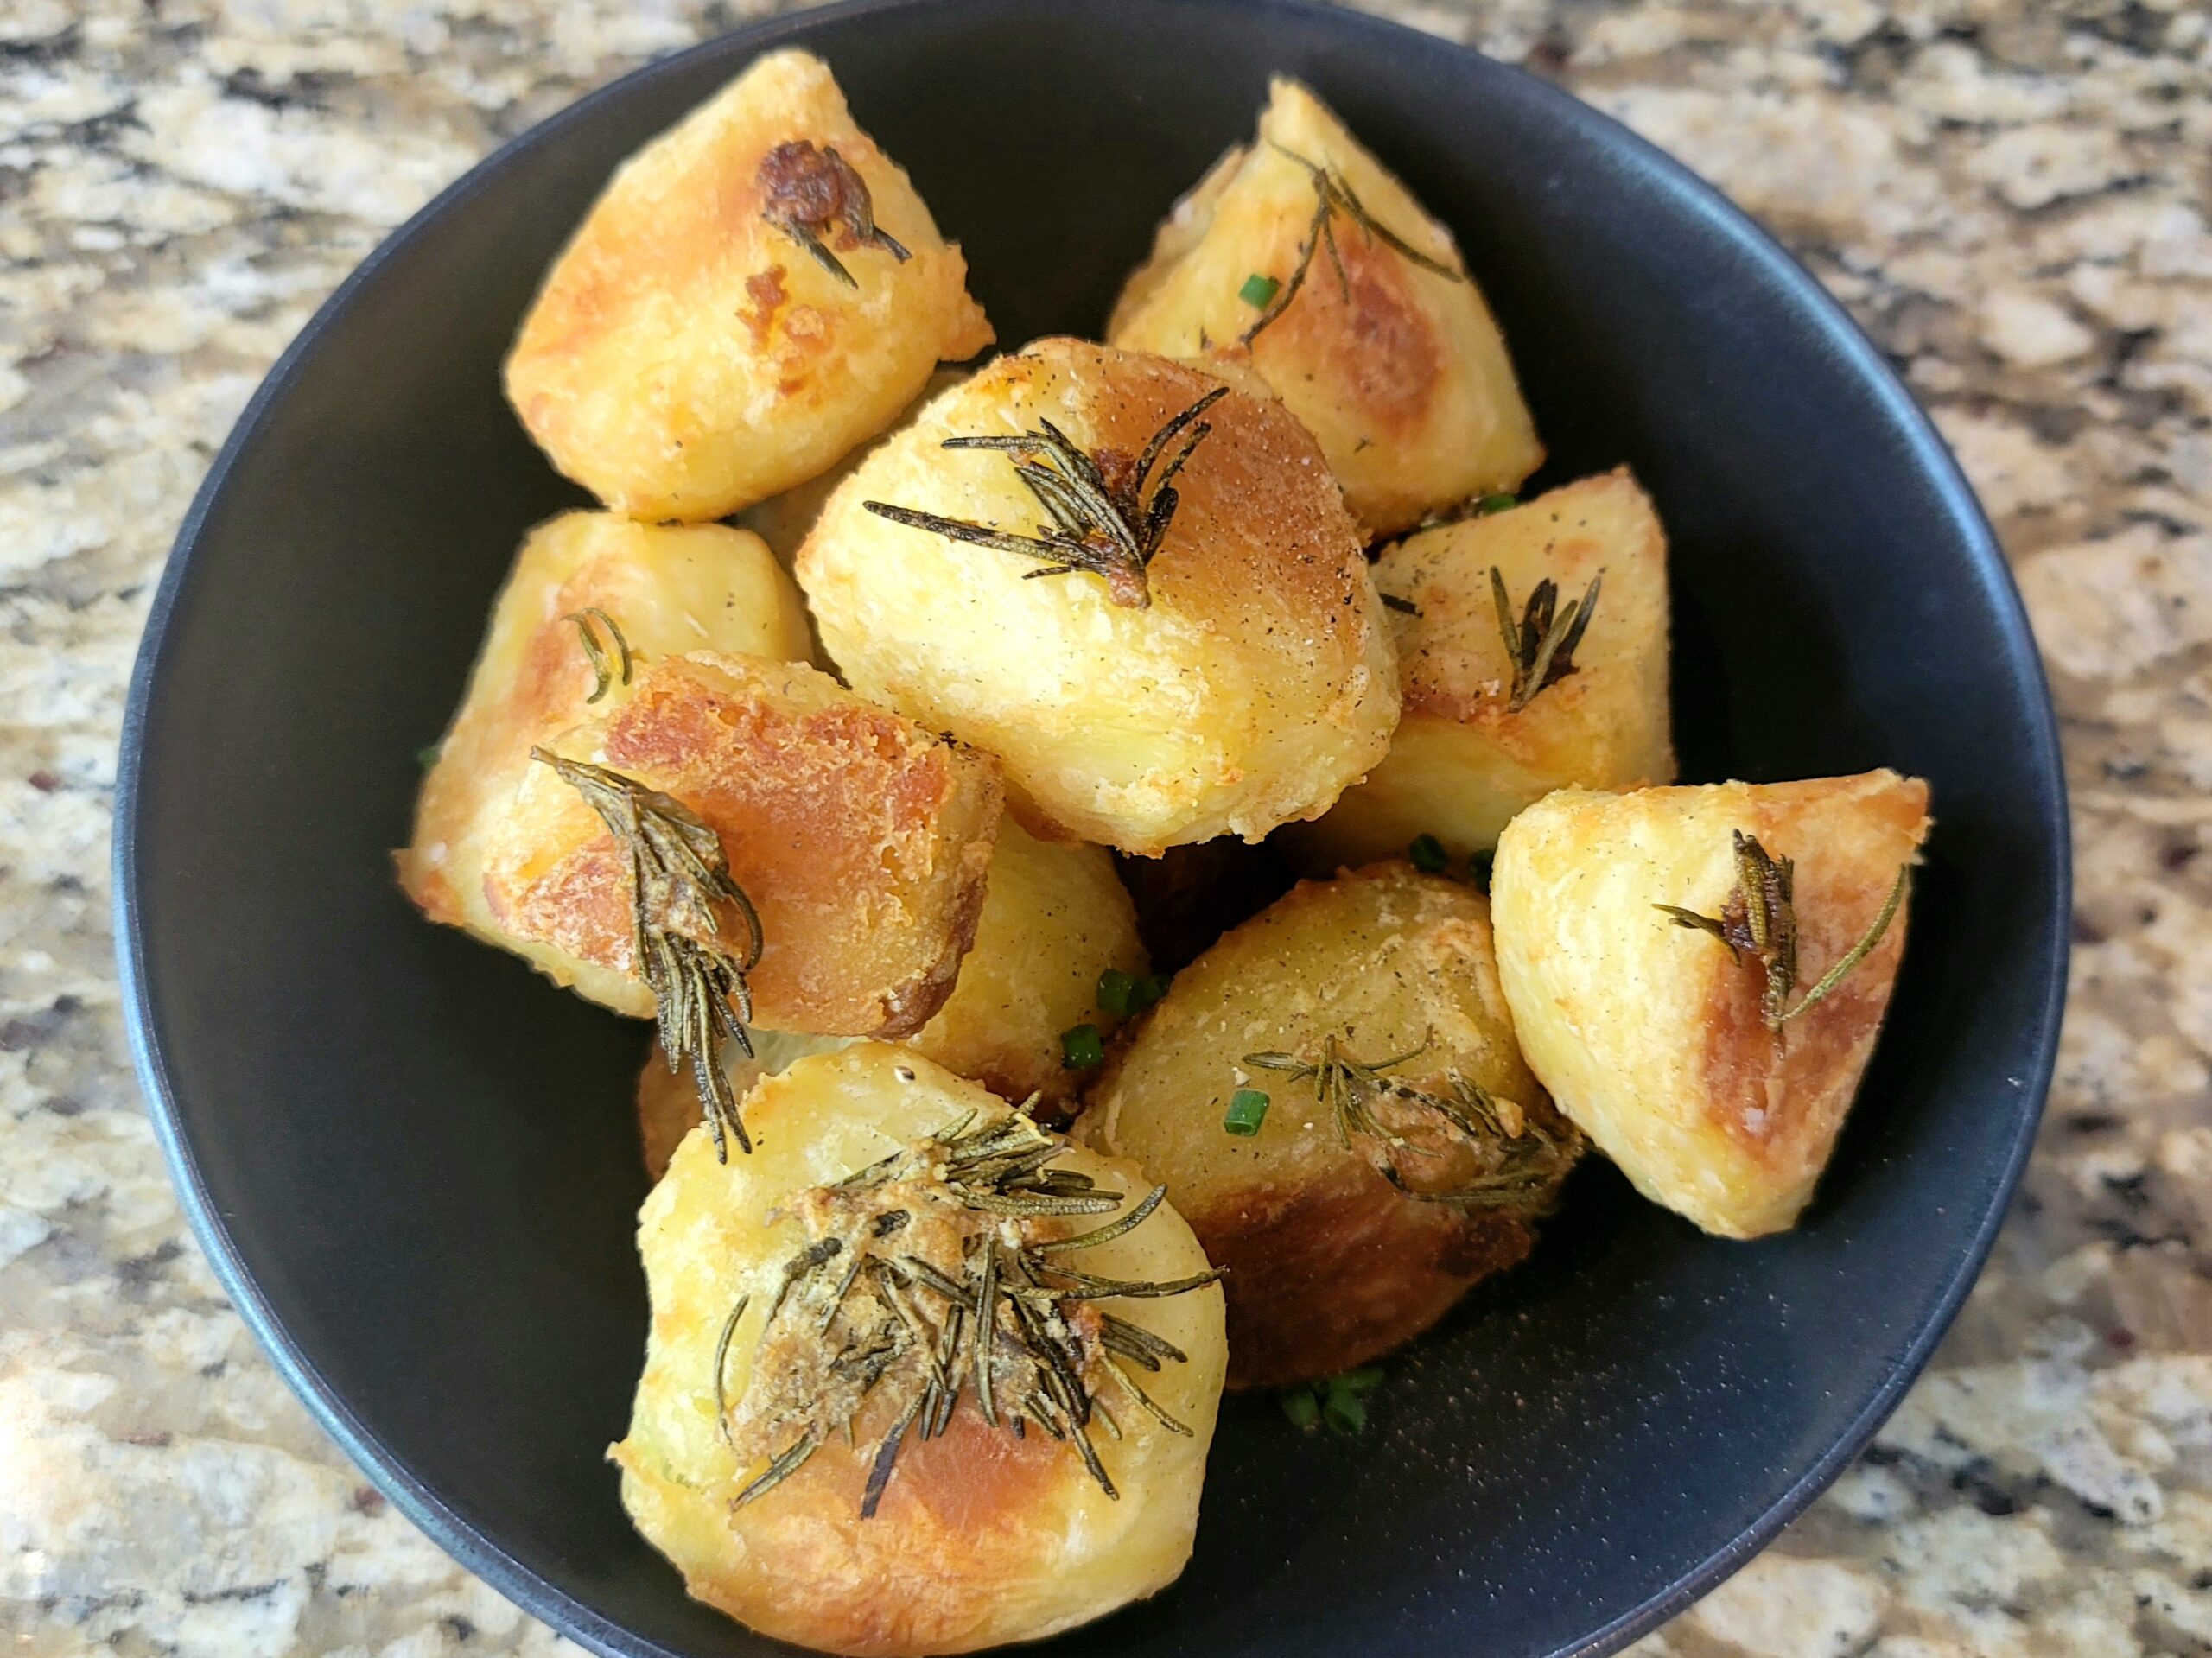 The Crispiest Roasted Potatoes